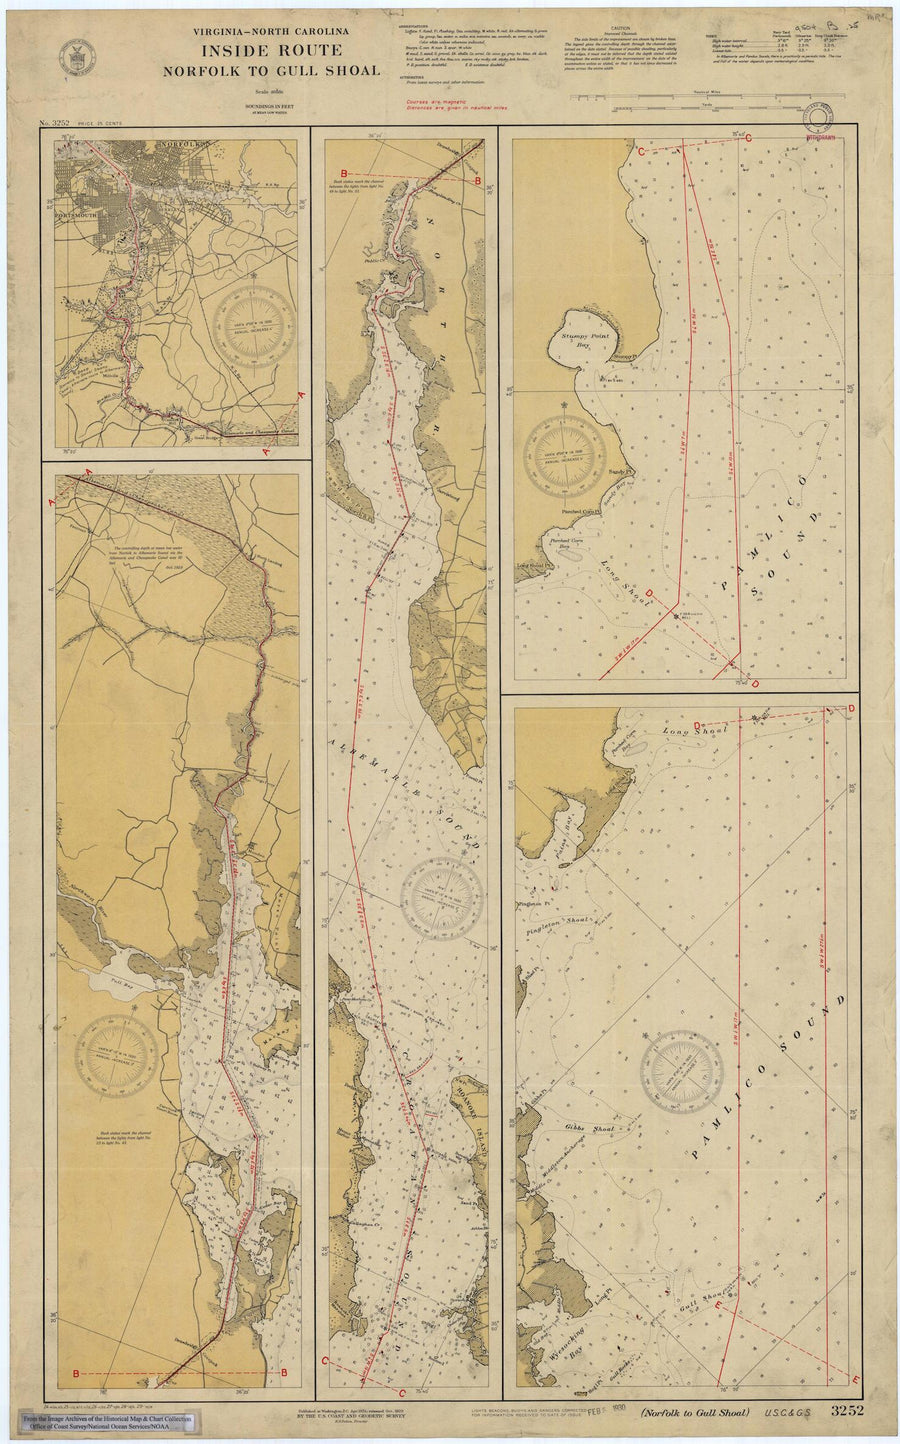 Norfolk to Gull Shoal Map - 1929